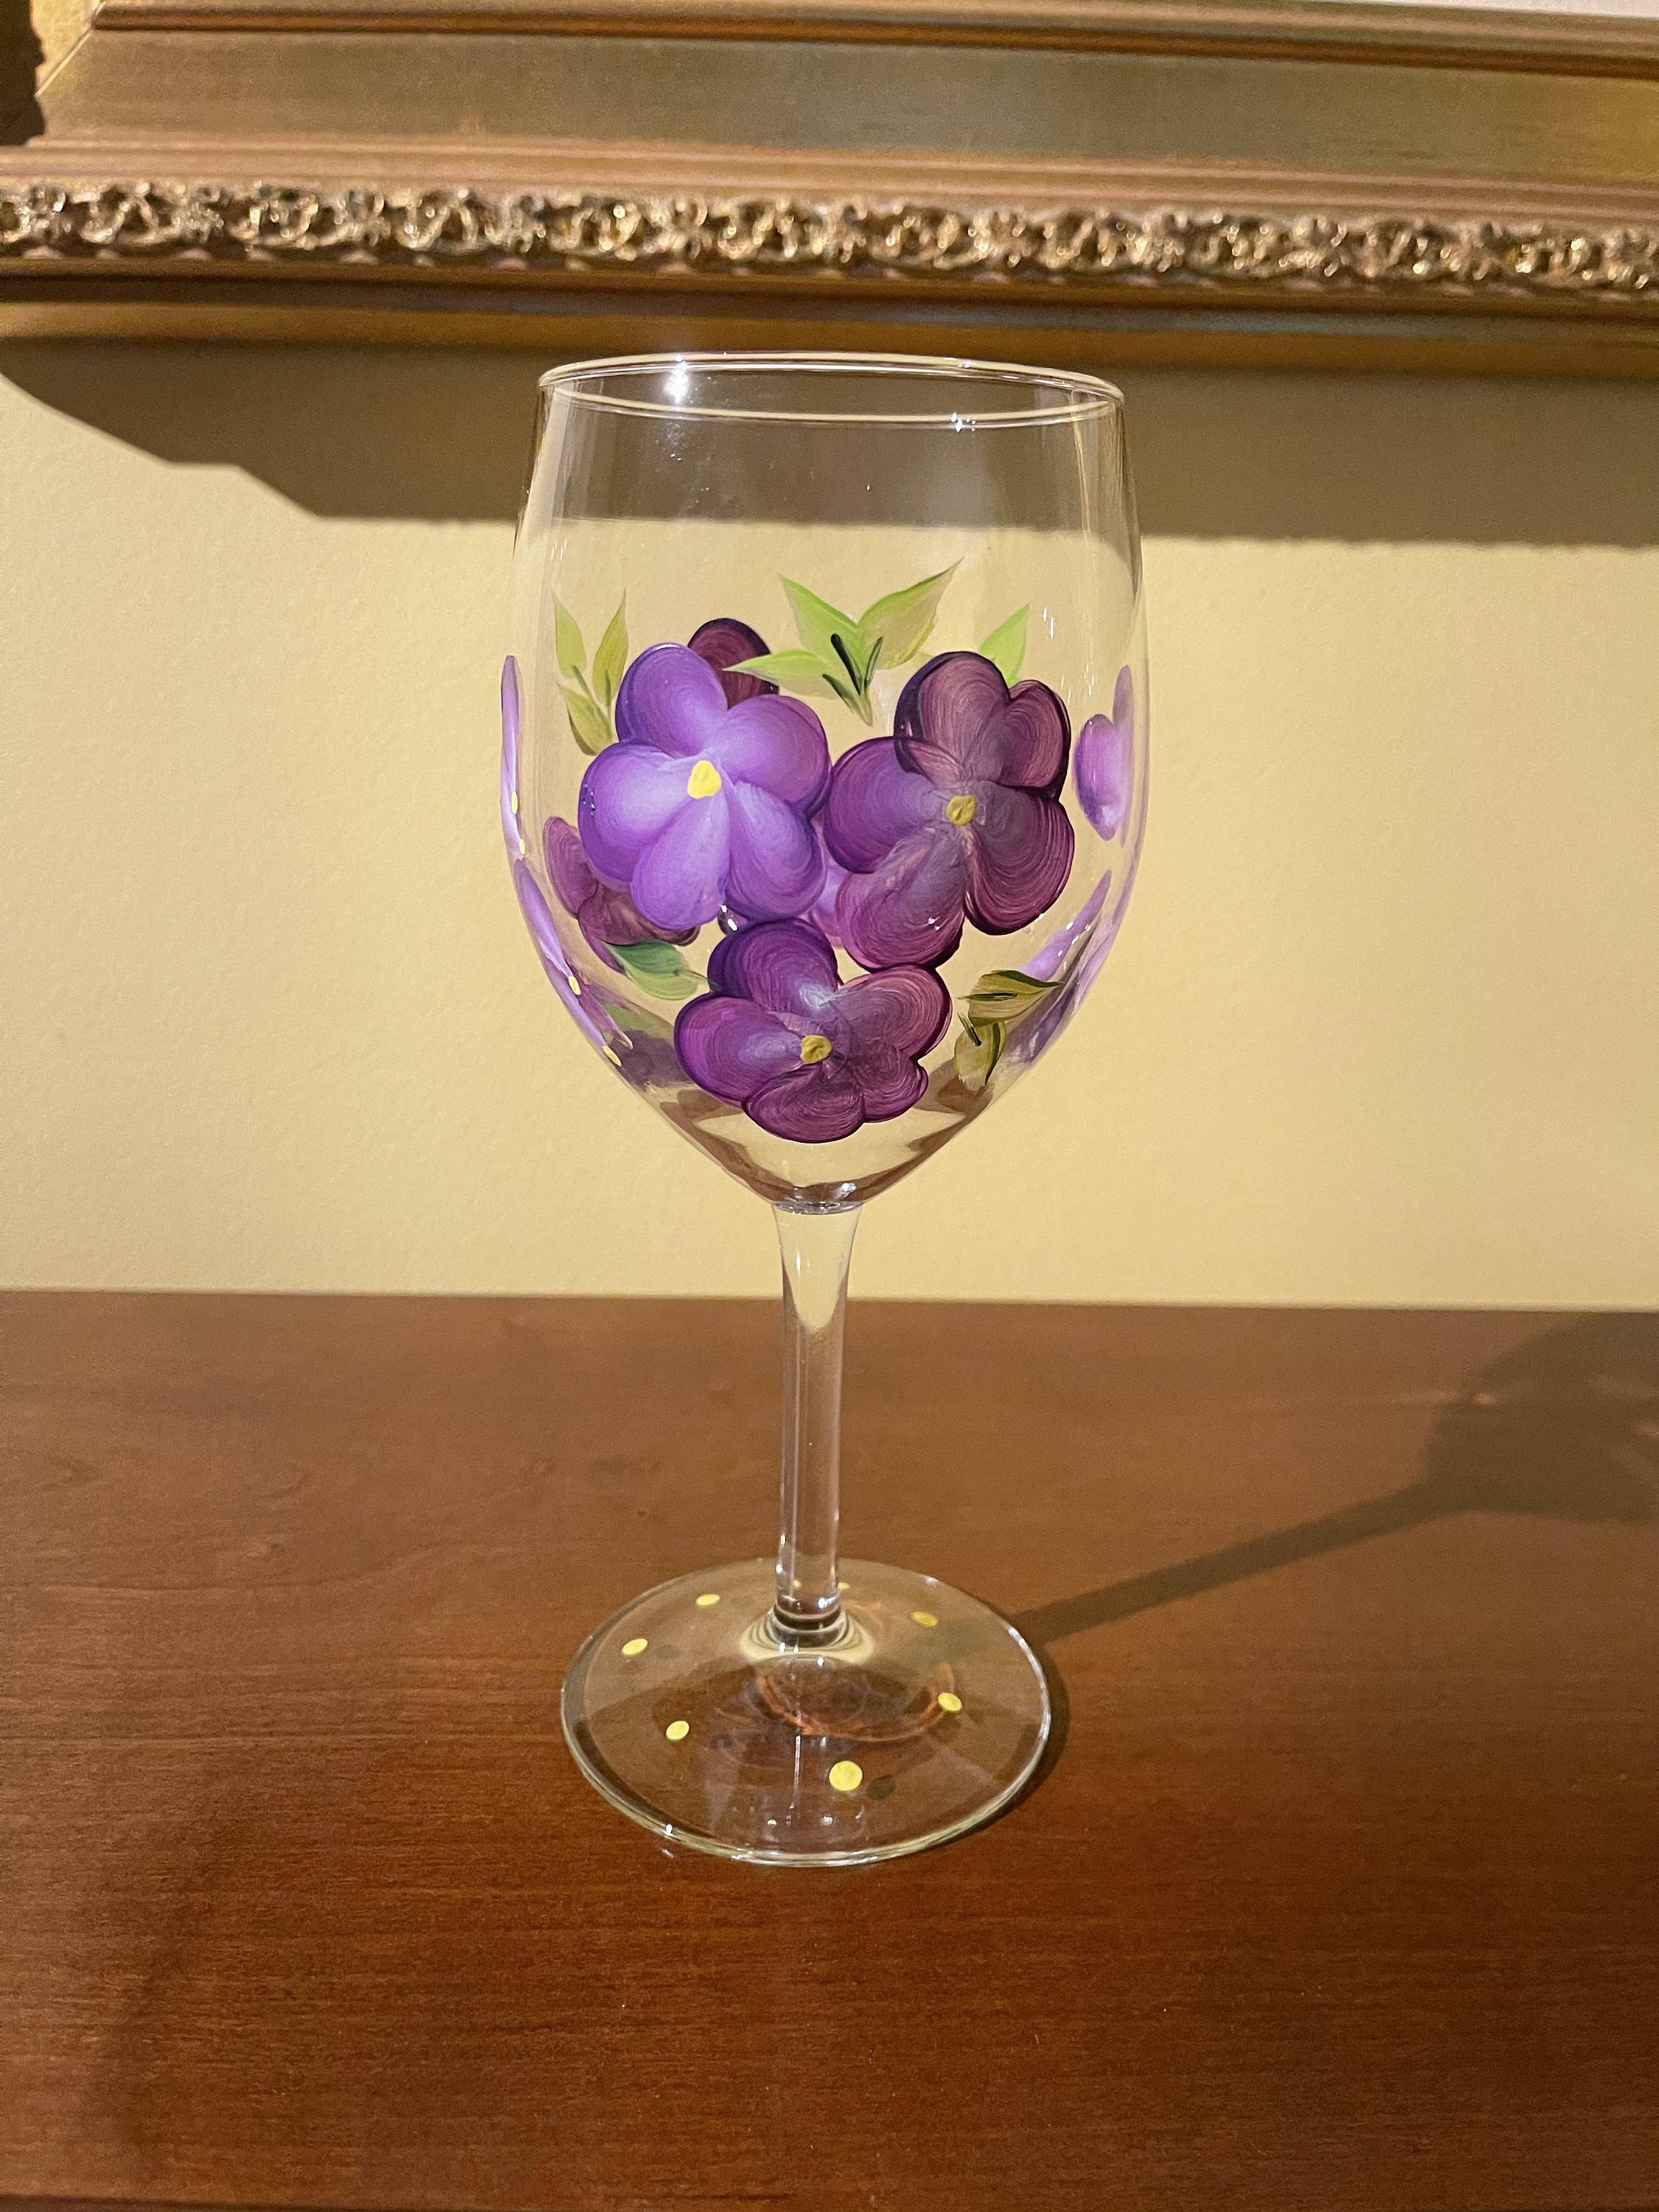 Hand Painted 15oz Assorted Floral Wine Glasses, MULTIPLE Designs